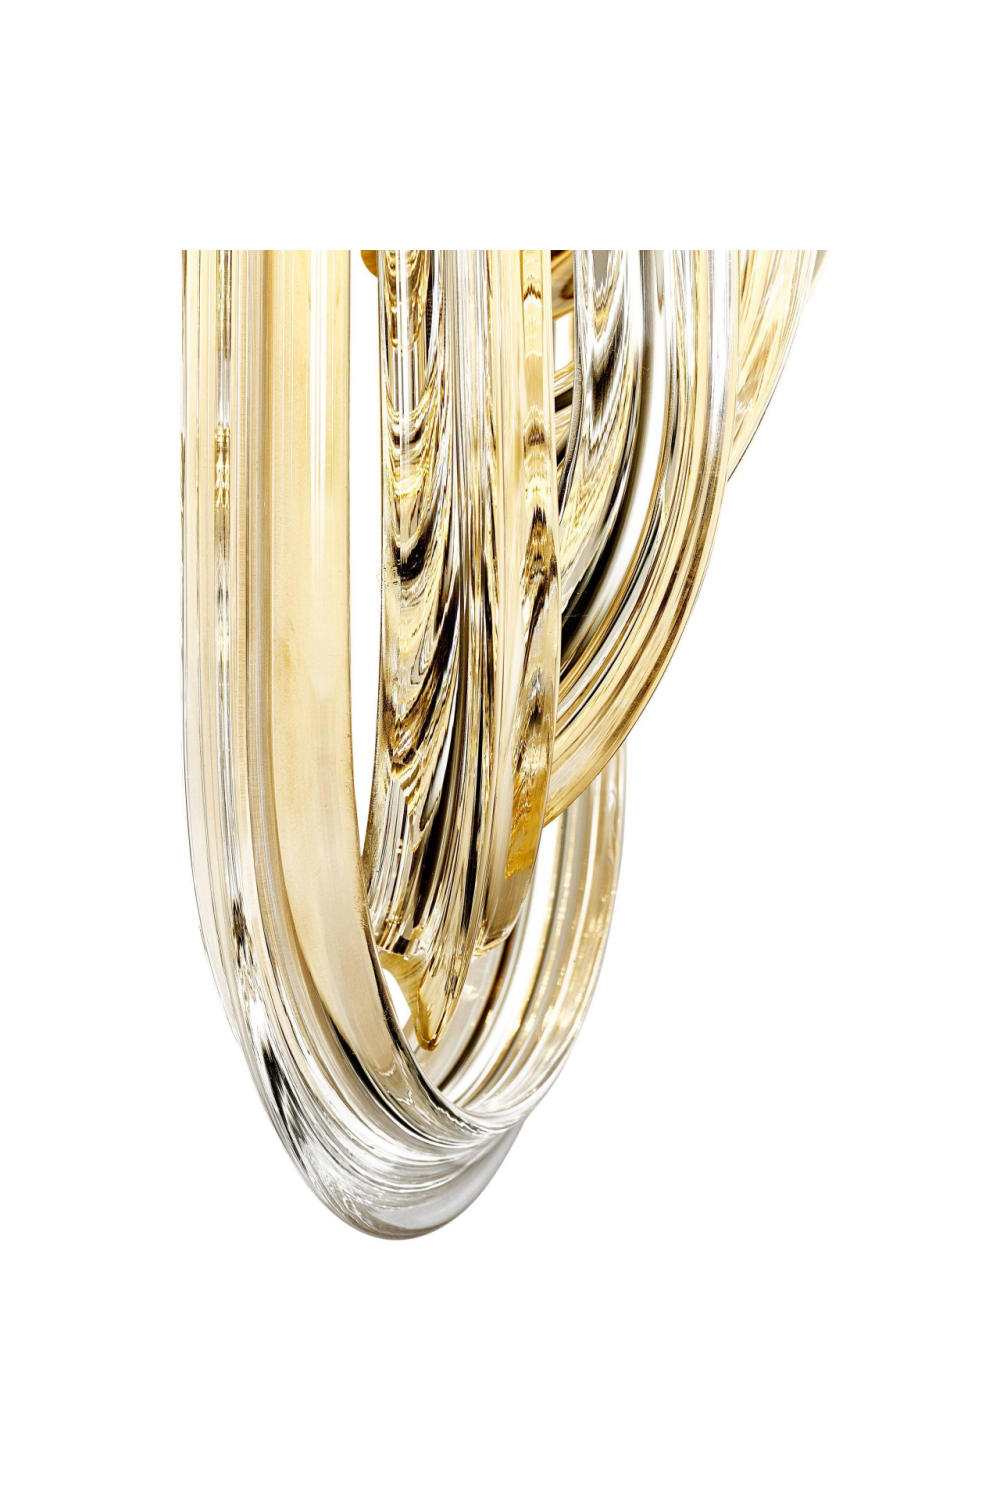 Lucite Loop Wall Sconce | Eichholtz Greco | OROA